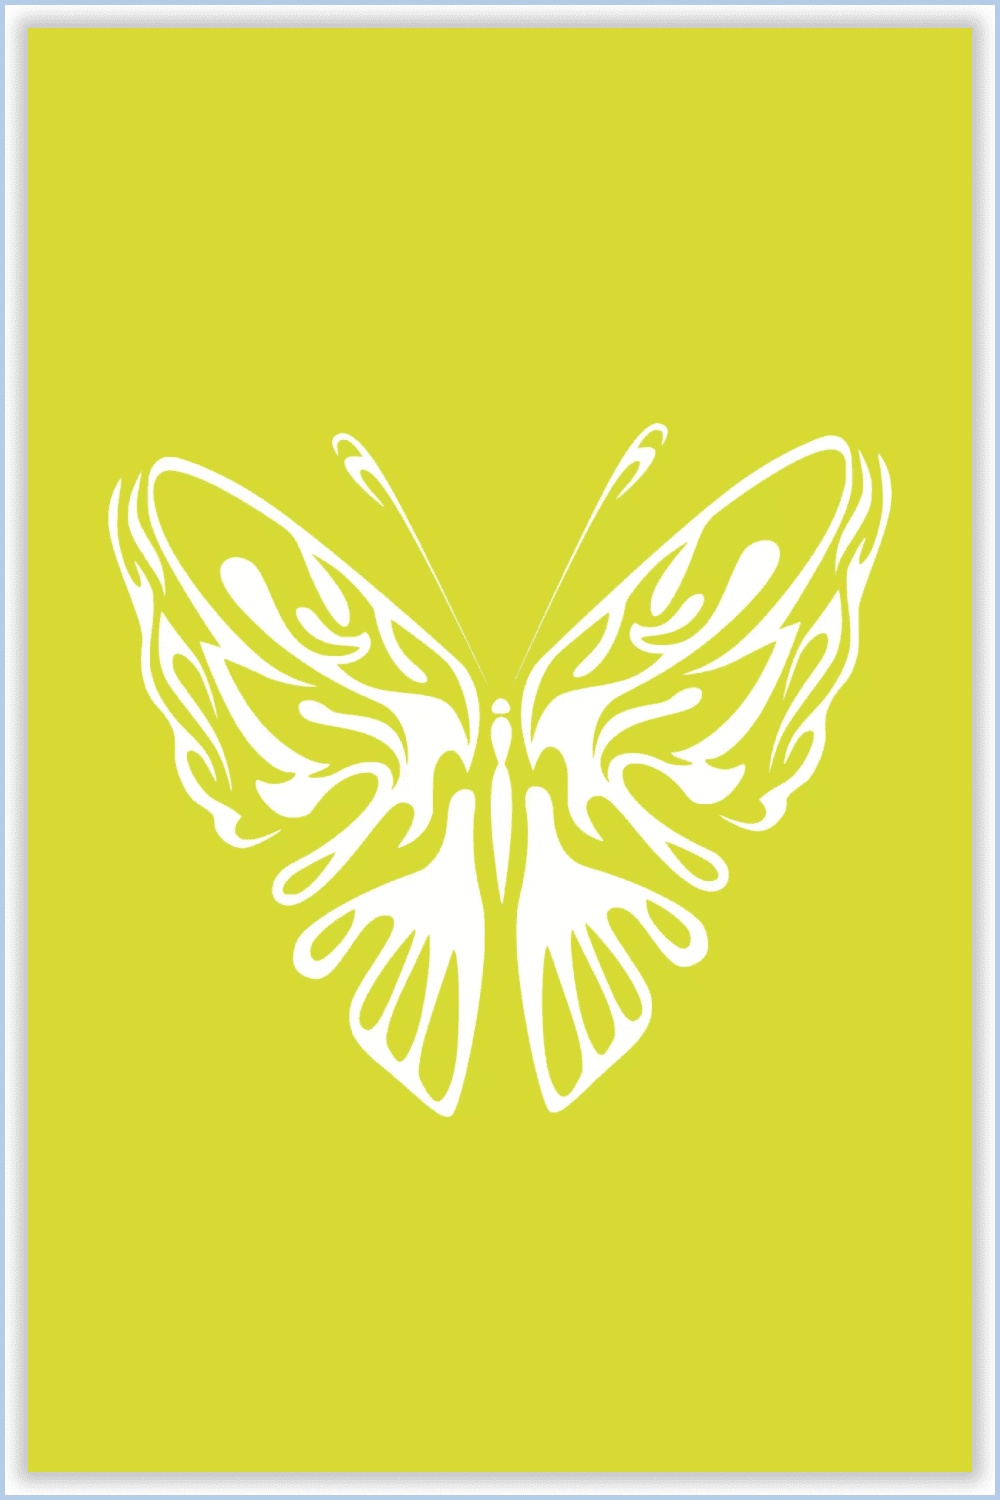 Minimalistic seamless butterfly design on yellow background.